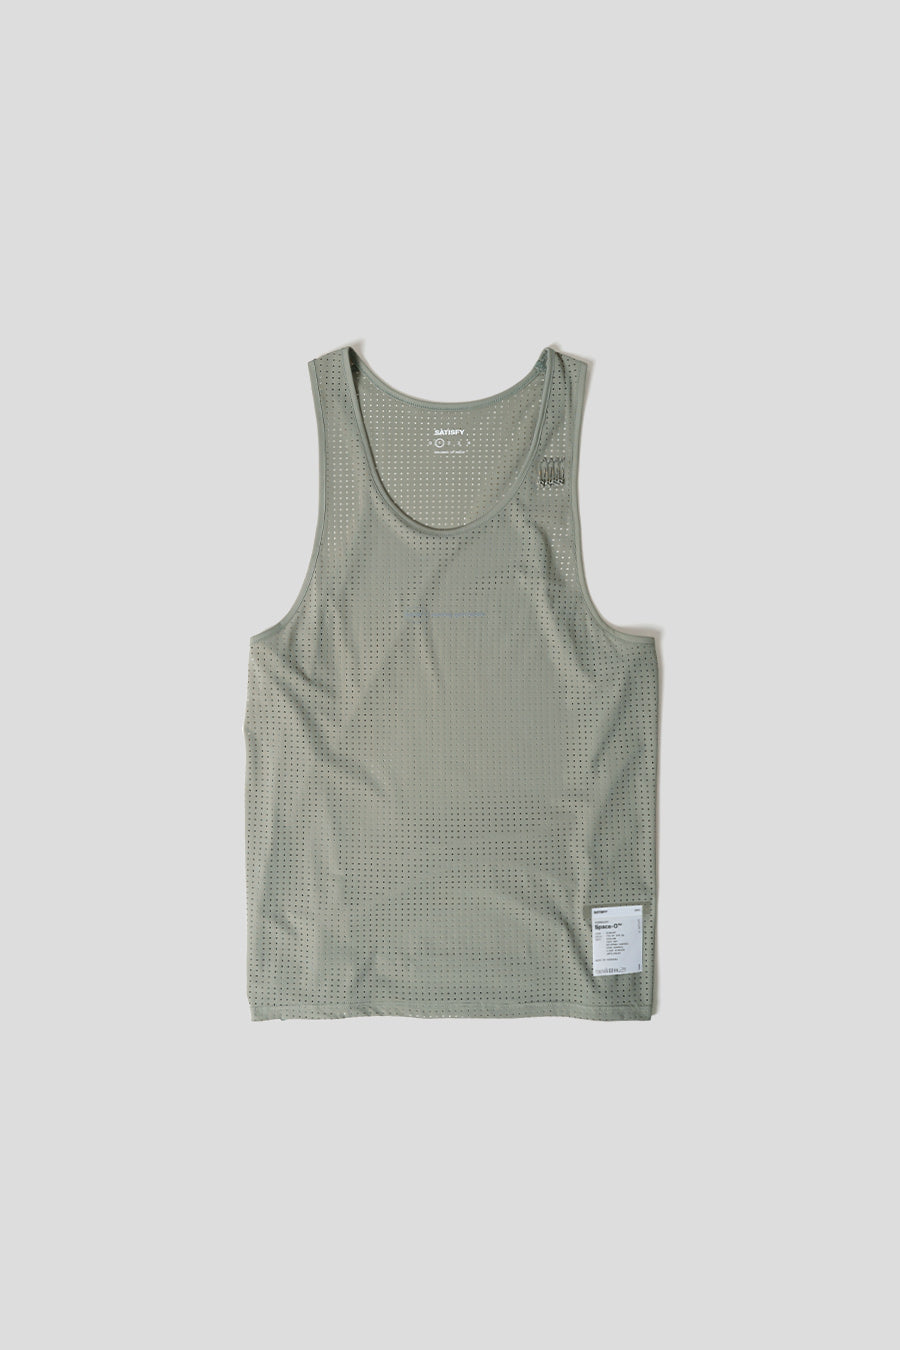 SATISFY - SAGE SPACE O TANK TOP  - LE LABO STORE